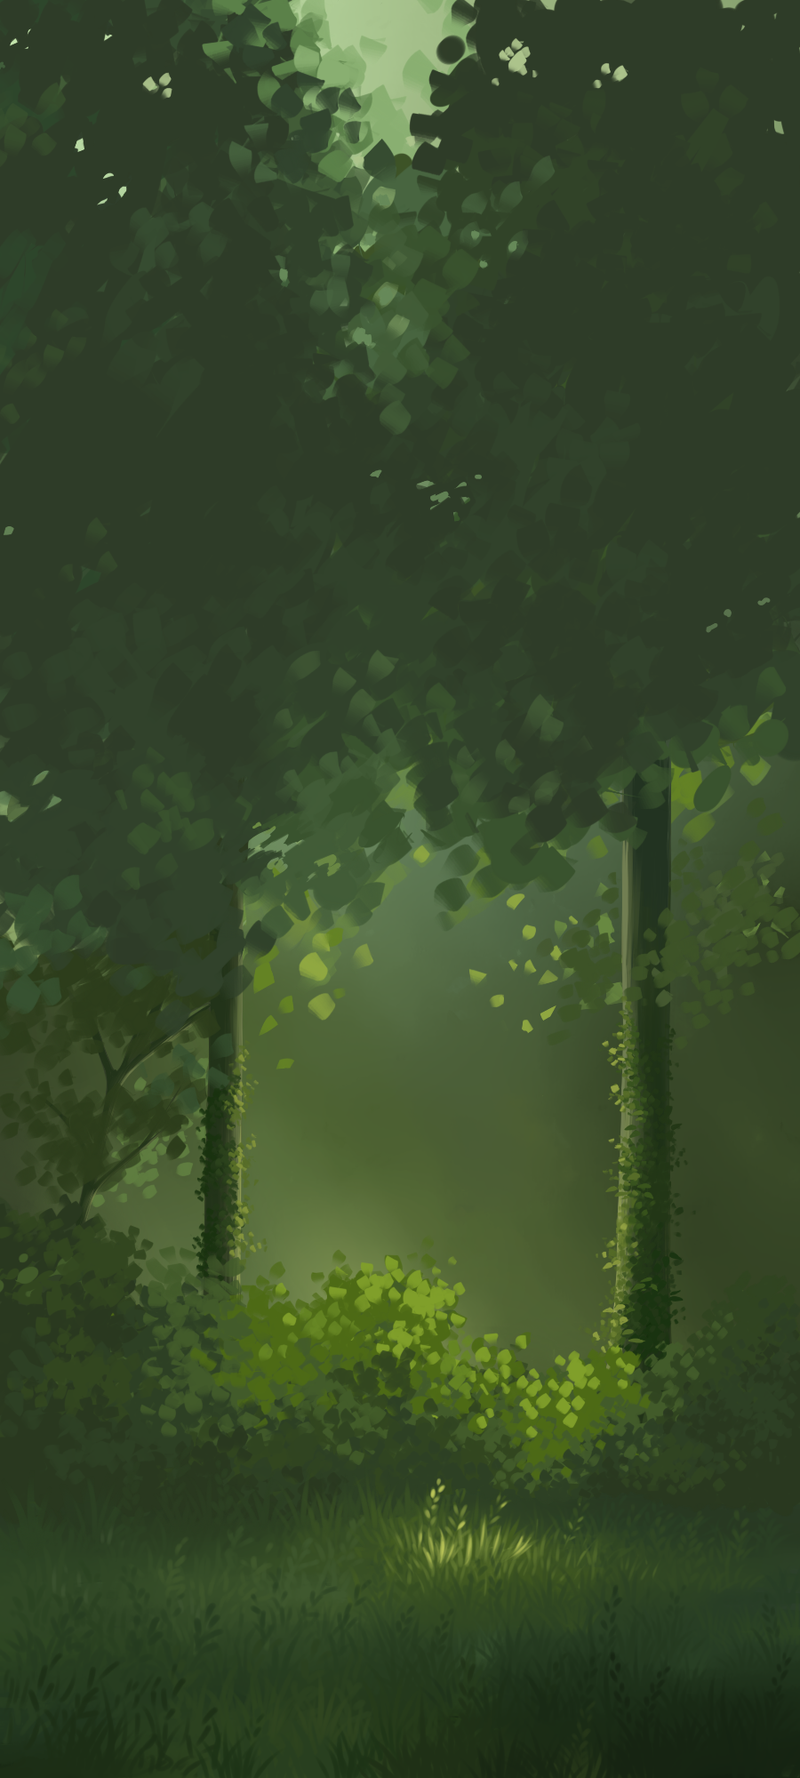 _free_background__green_forest_by_spudfuzz-d9h80ib.png